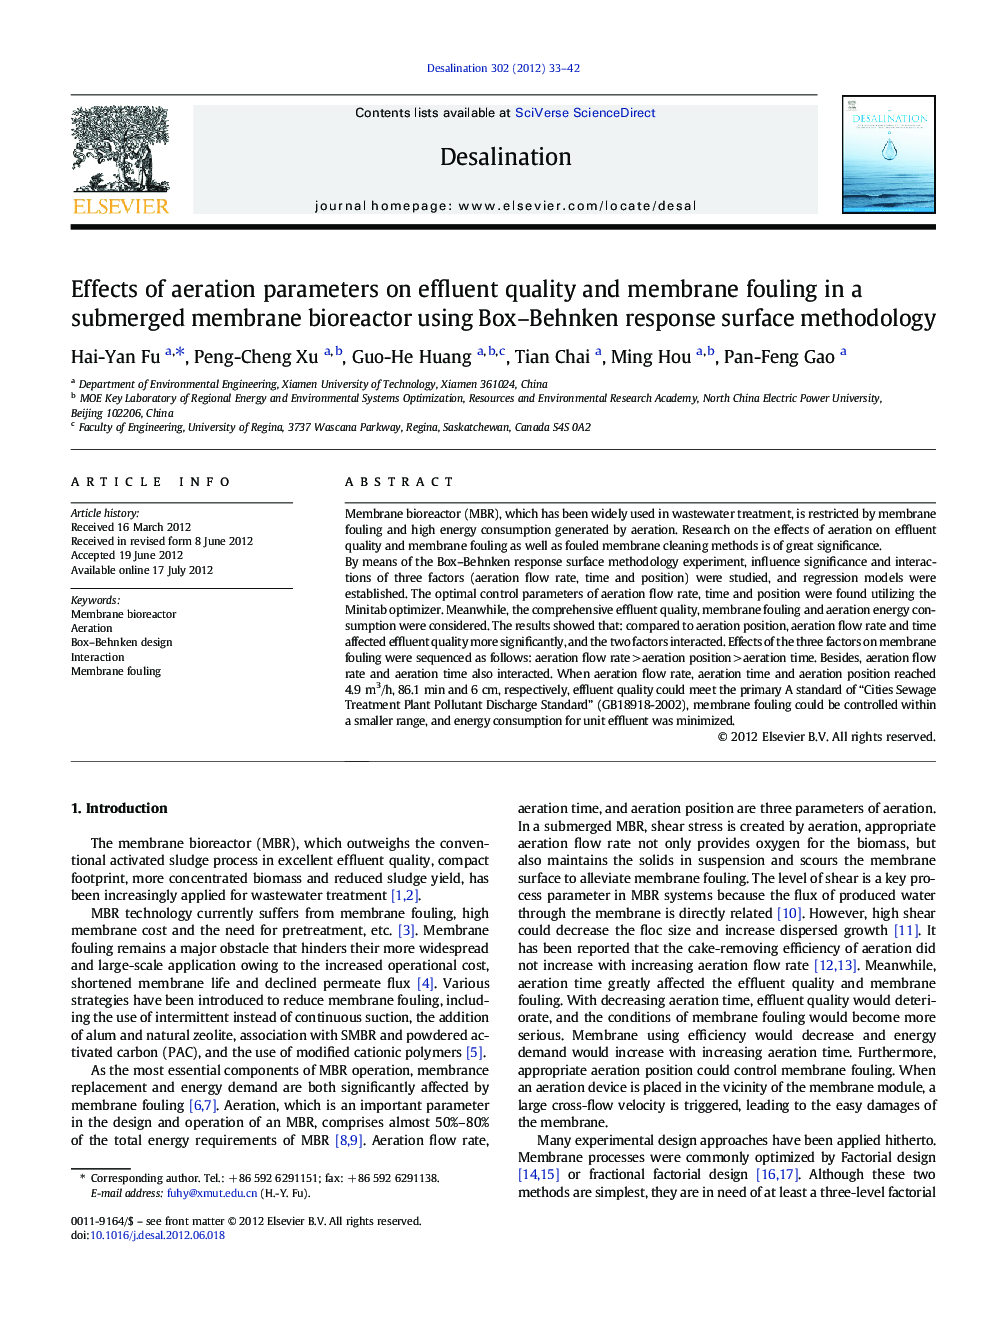 Effects of aeration parameters on effluent quality and membrane fouling in a submerged membrane bioreactor using Box-Behnken response surface methodology